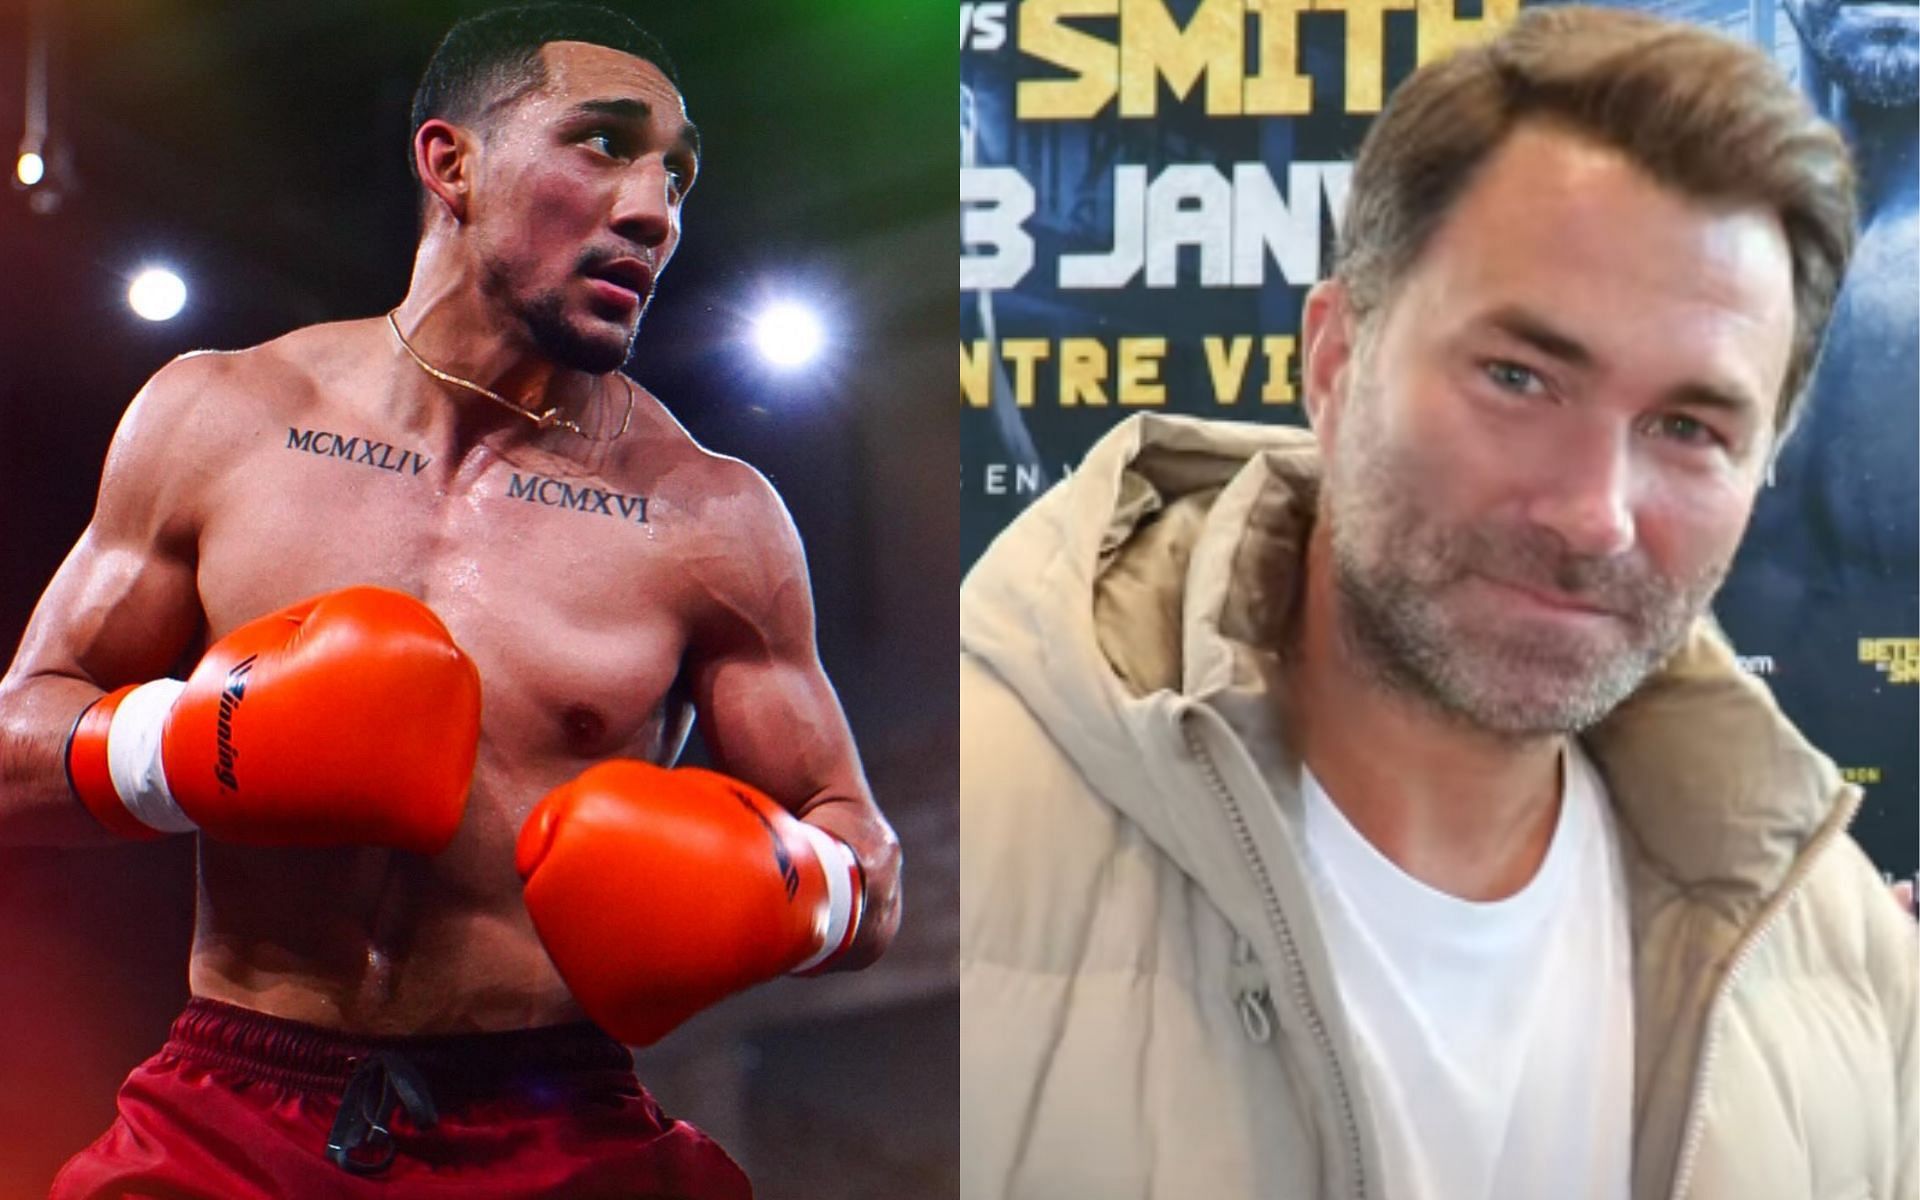 Eddie Hearn [Right] put Teofimo Lopez [Right] on blast for comments he made about him [Image courtesy: @TeofimoLopez - X, and Boxing Social - YouTube